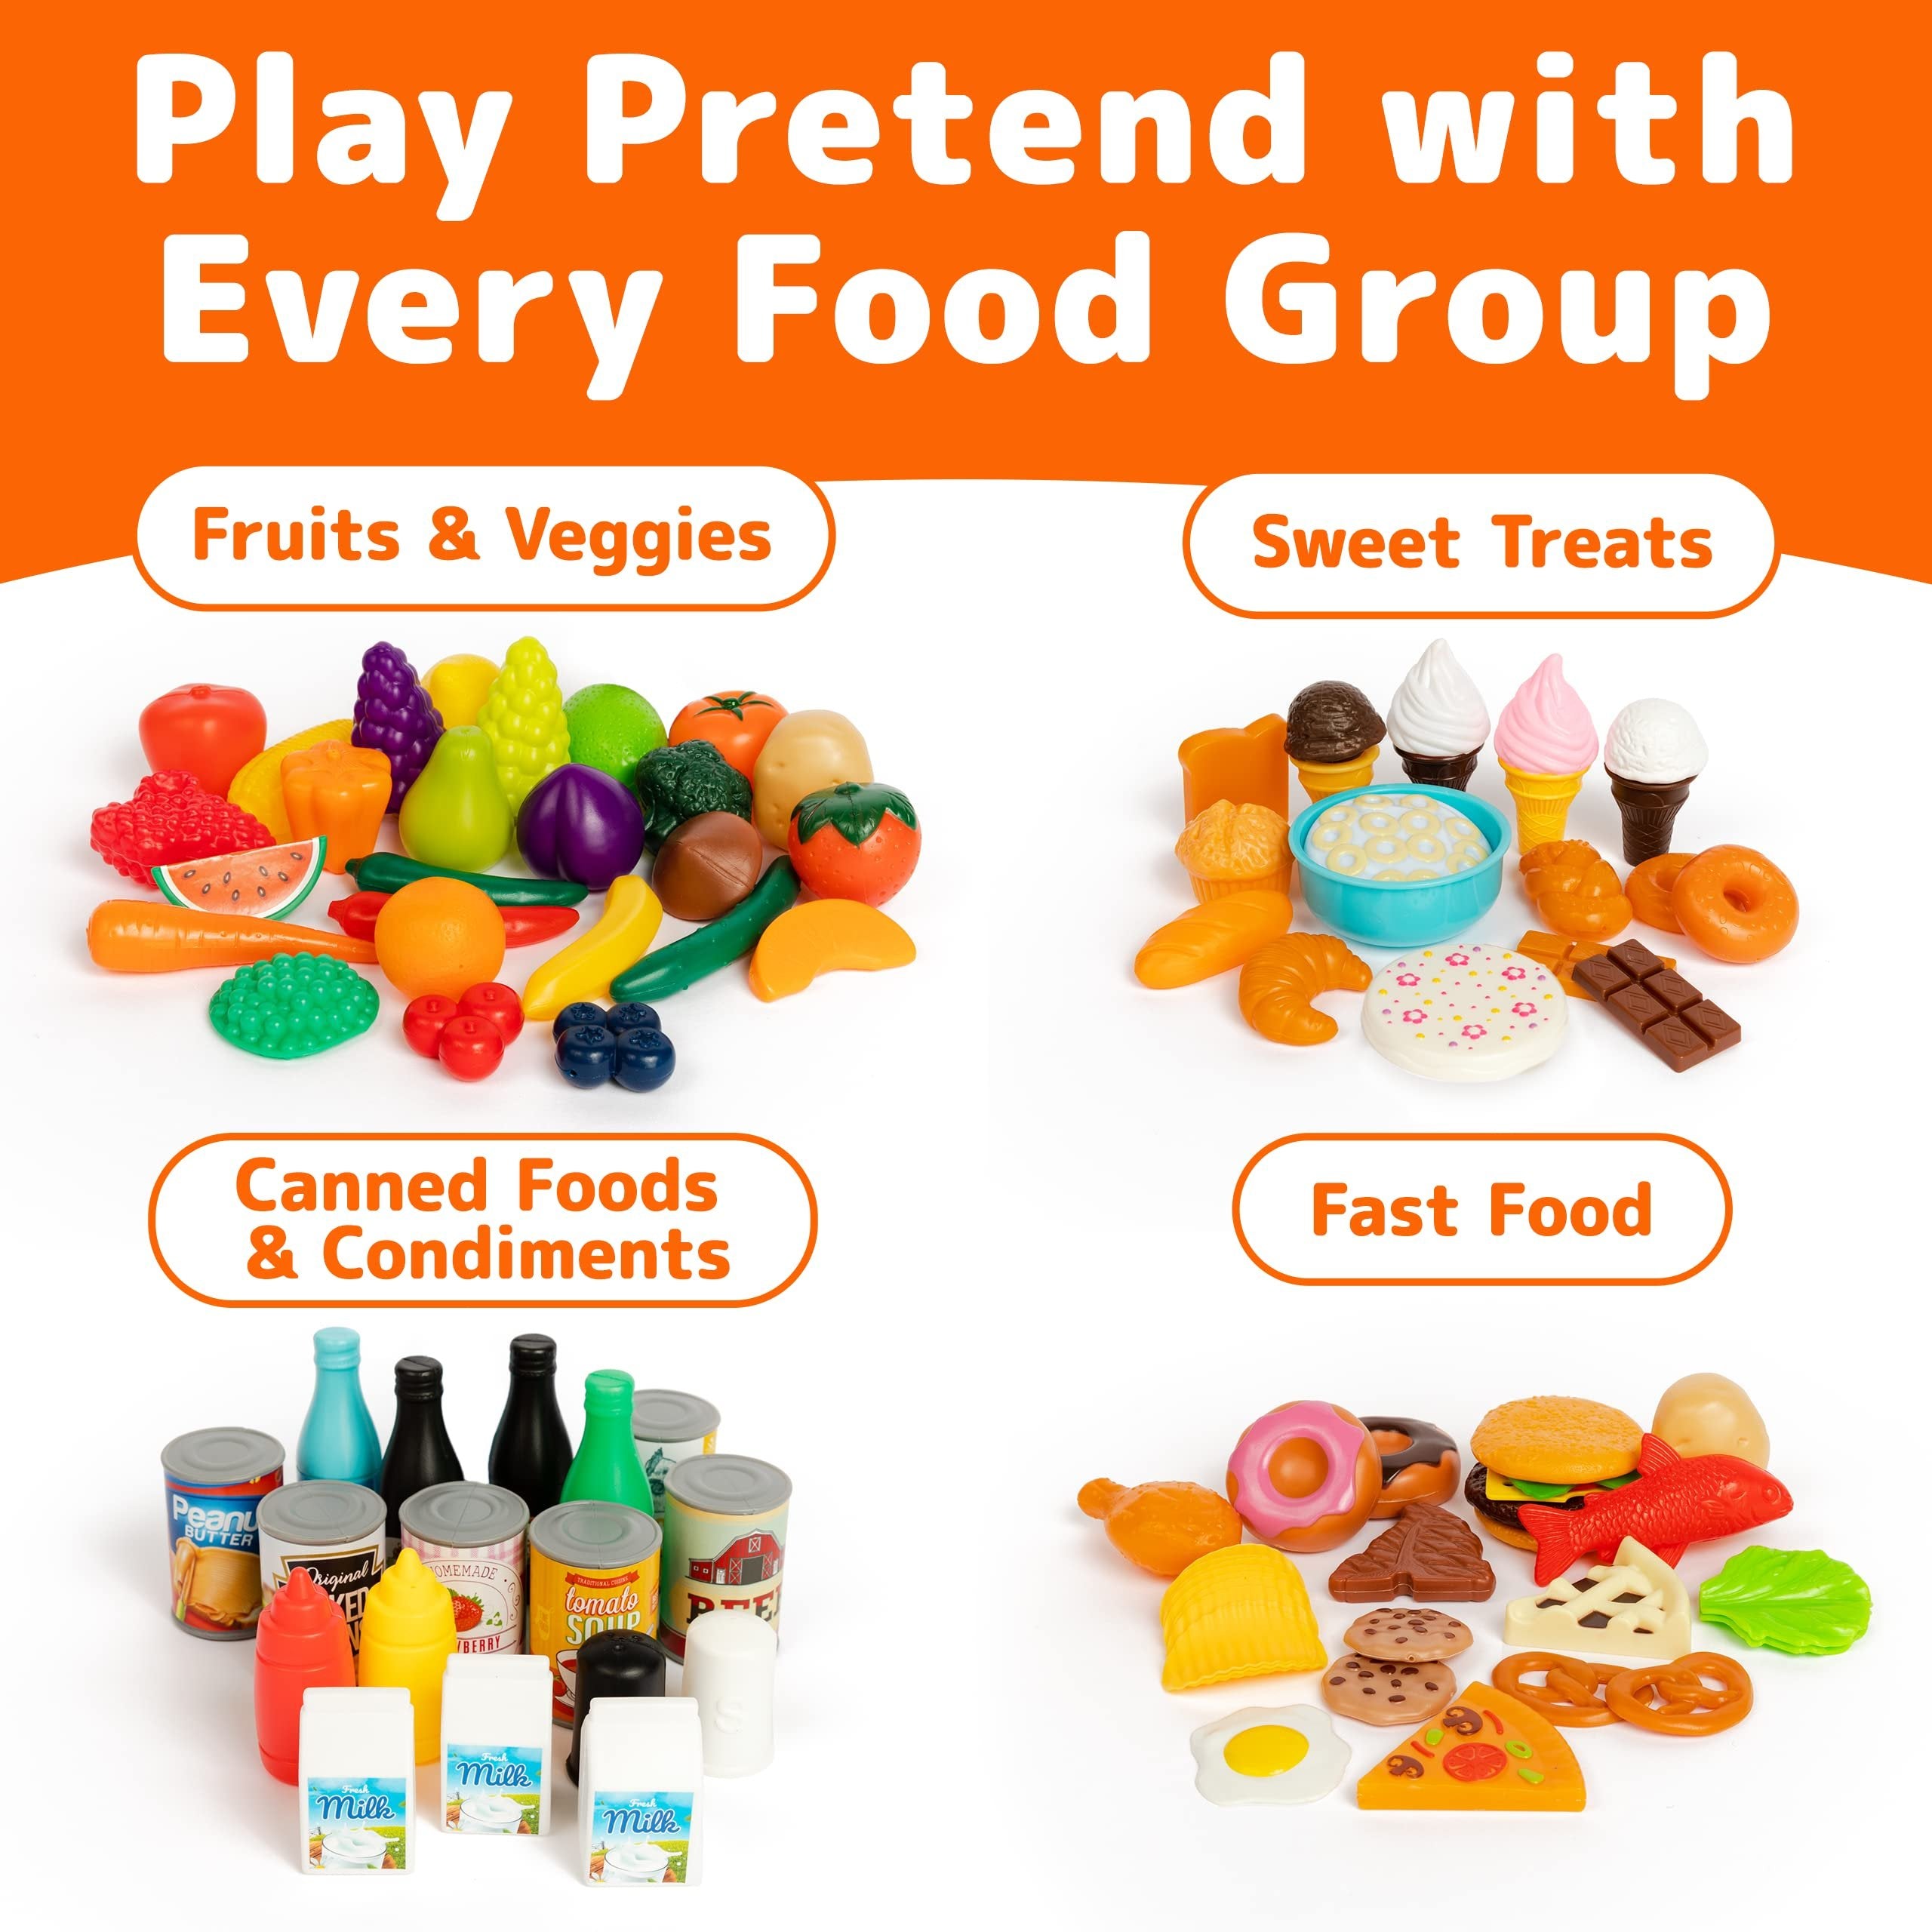 JaxoJoy Pretend Play Food Set, Toy Food Assortment Playset for Kids & Toddlers, Pretend Play Food Sets, Kids Kitchen Playset, Kitchen Toys, Reusable Color-in Bag, Play Kitchen Accessories (150pcs)